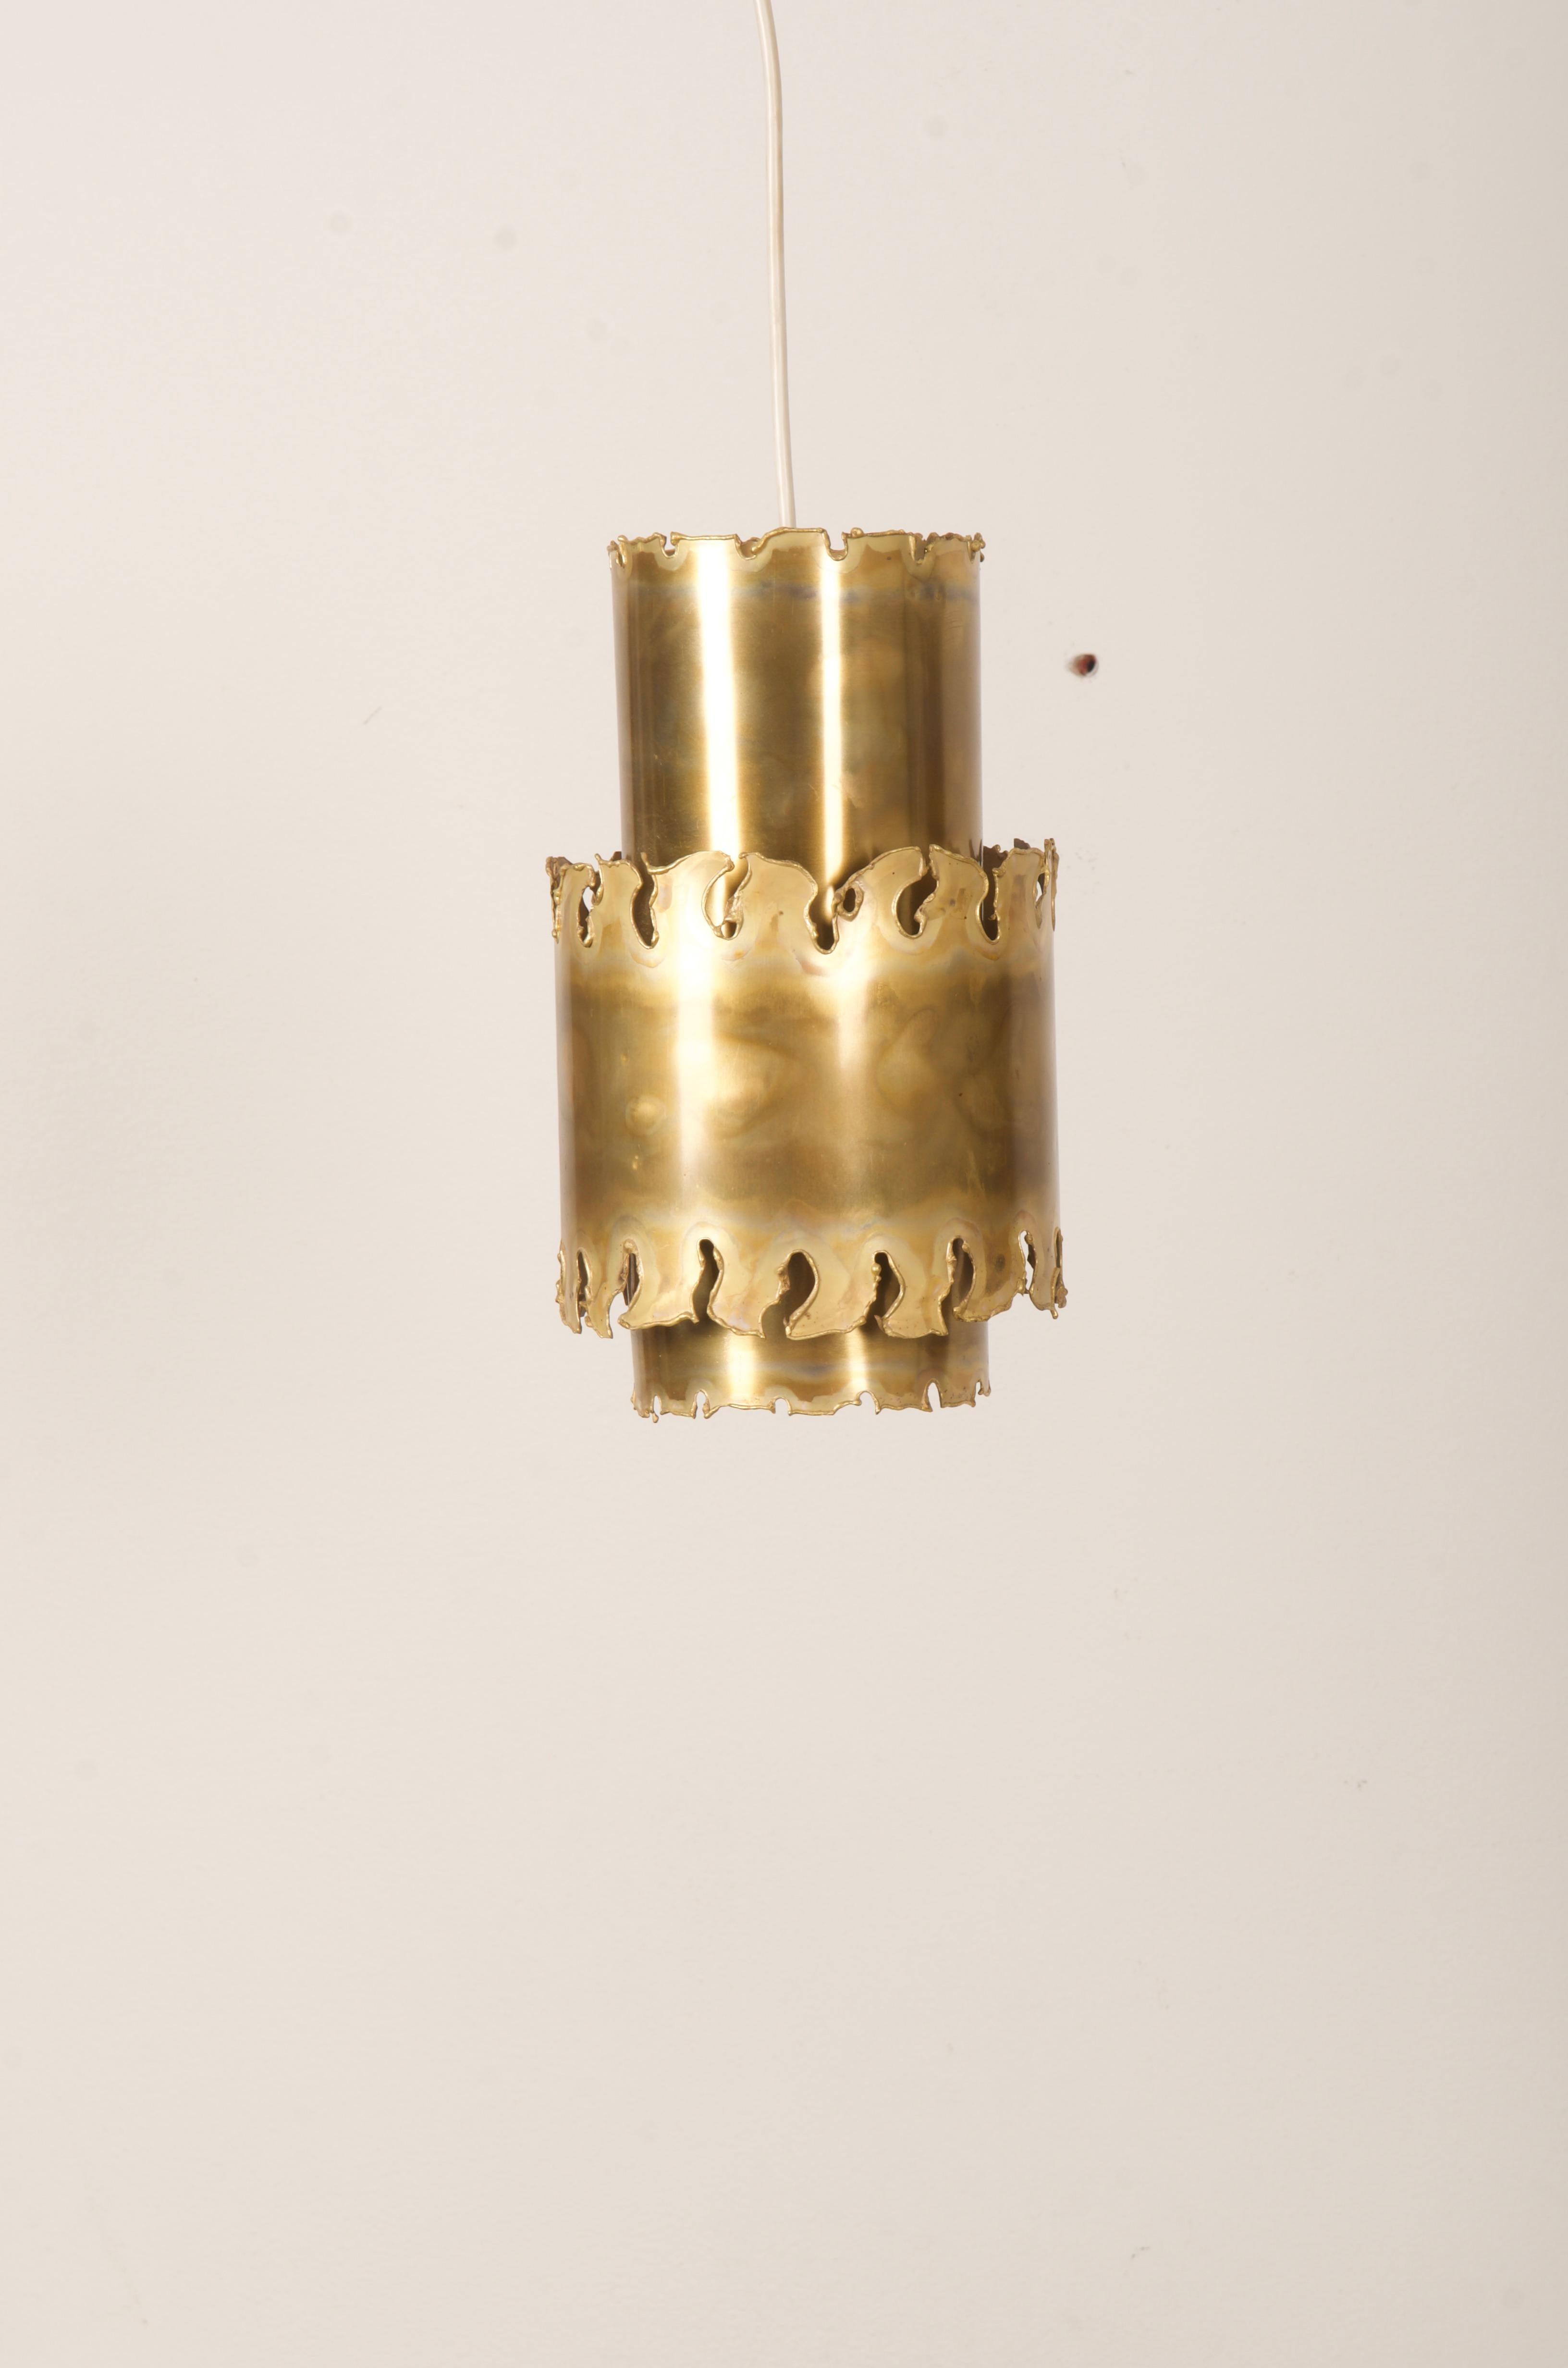 Brass lamp fitted with one E27 socket. Designed by Svend Aage Holm Sørensen in the 1960 in Denmark. 
2 Pieces available, price per lamp.